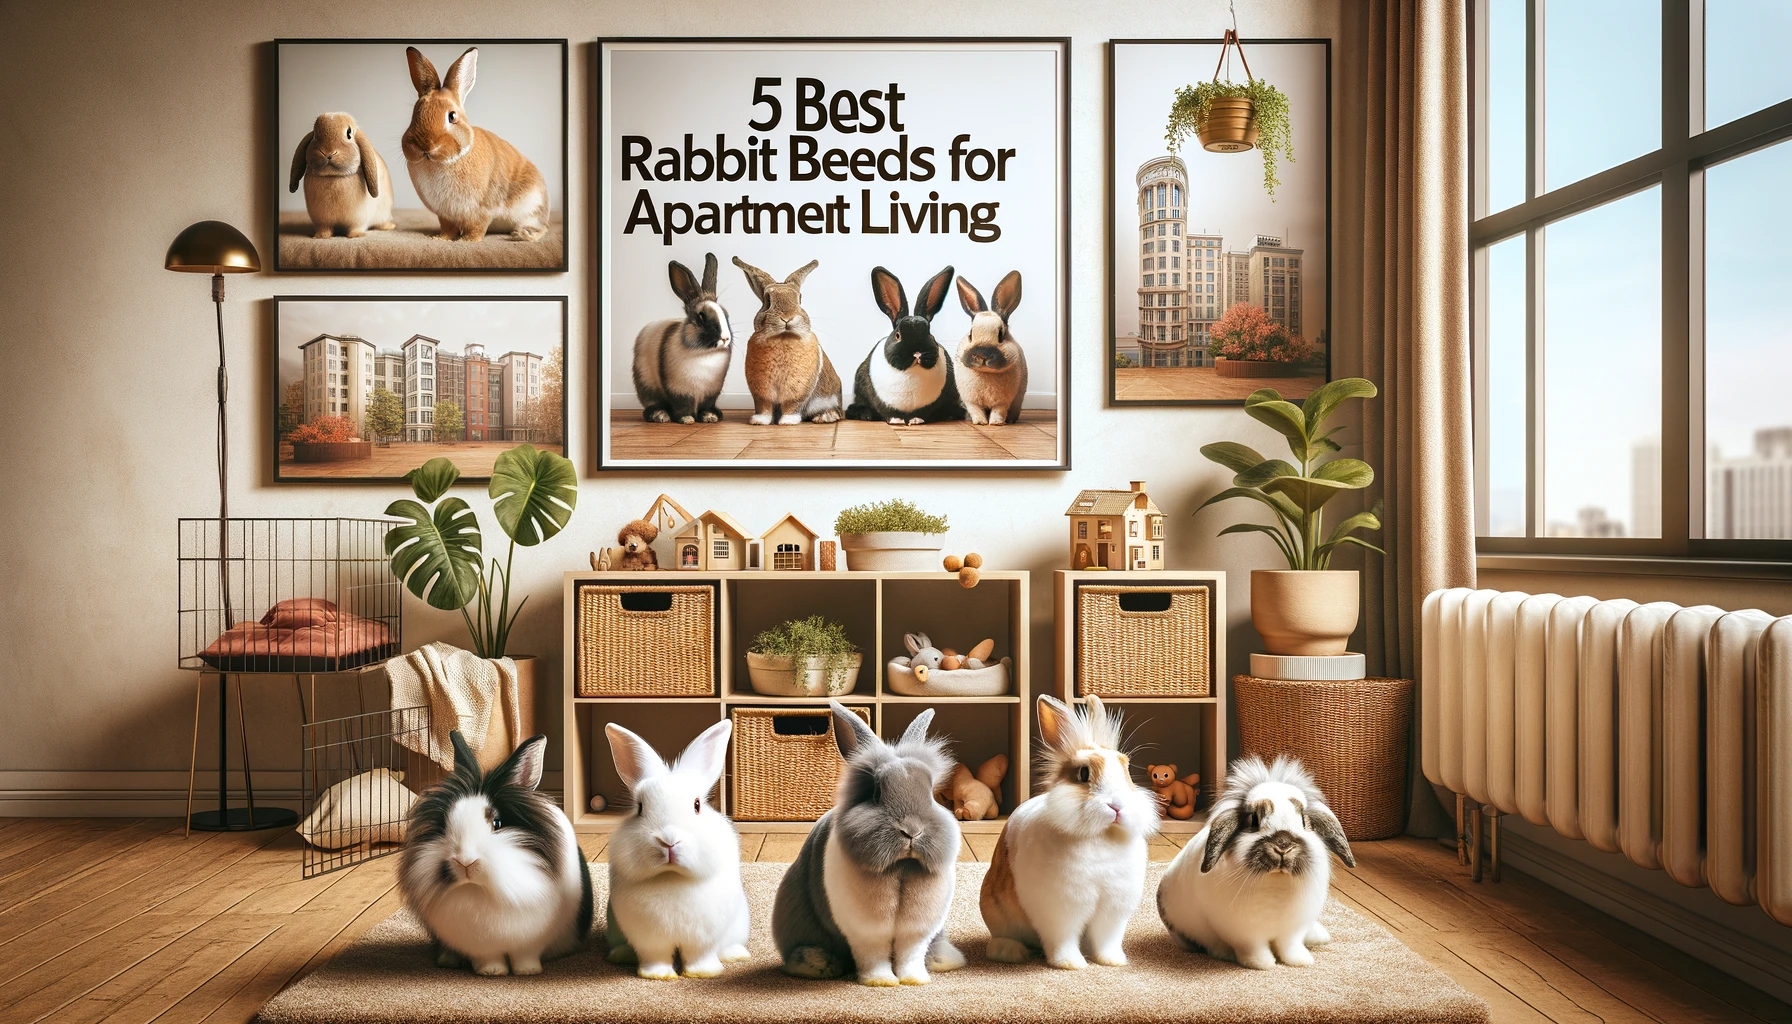 5 best rabbit breeds for apartment posing together